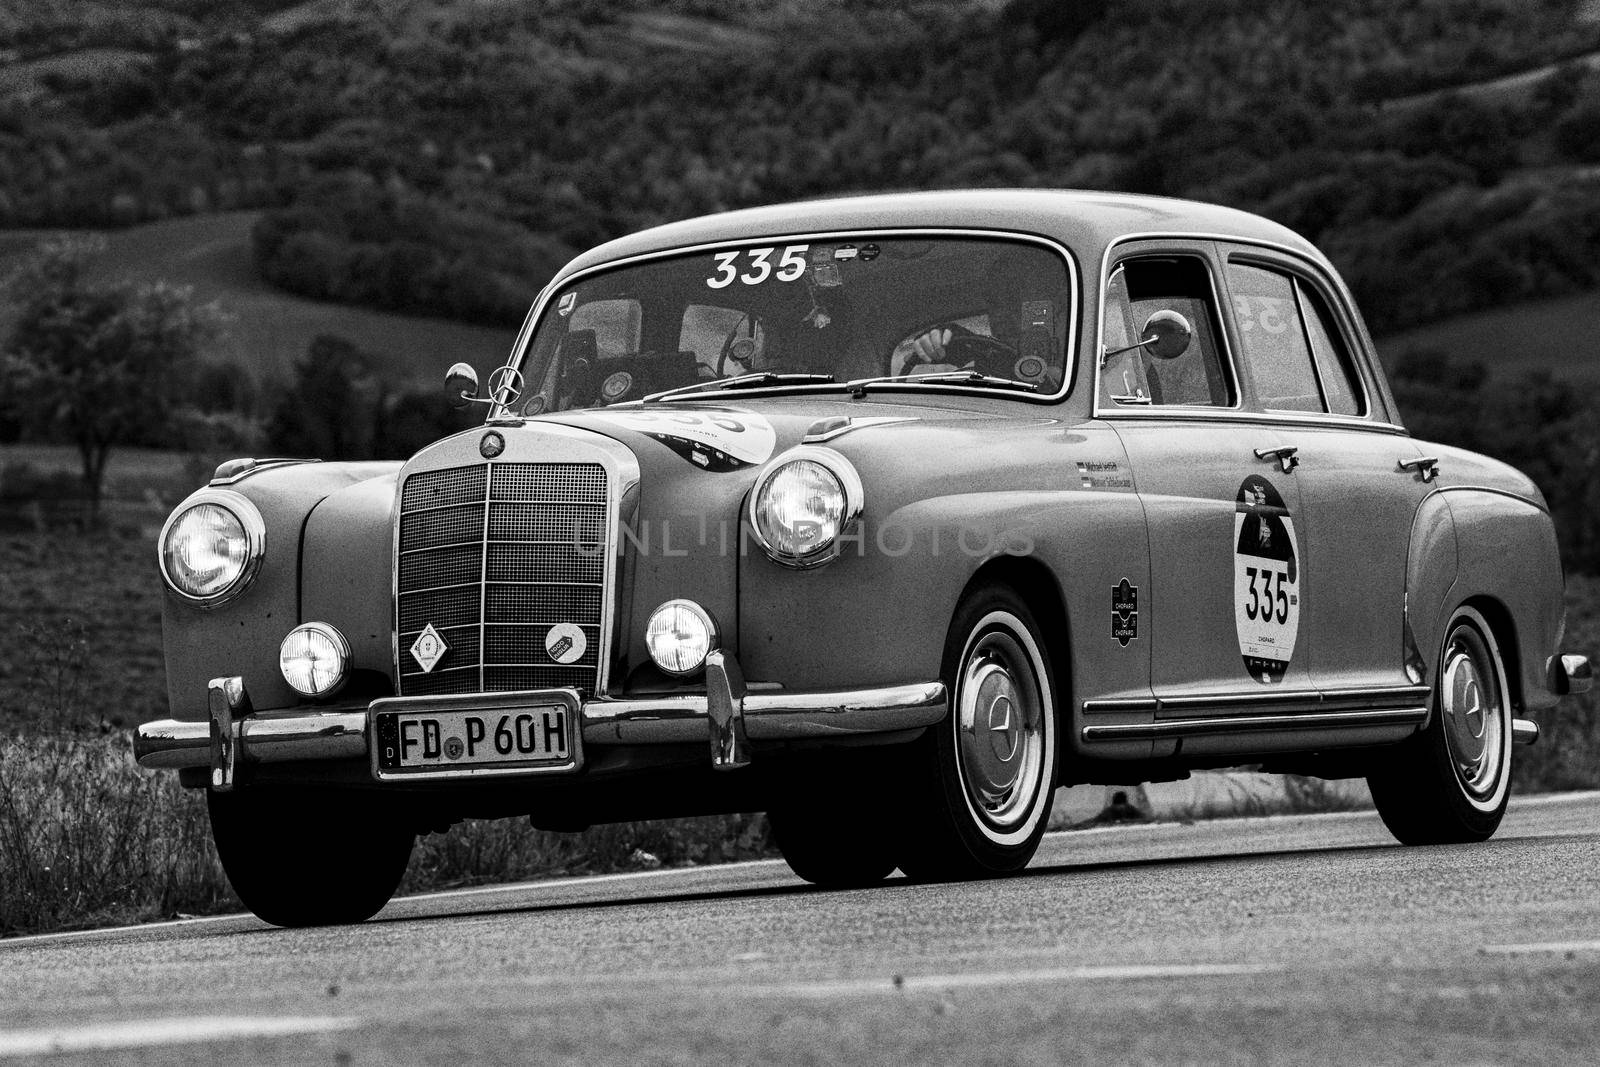 CAGLI , ITALY - OTT 24 - 2020 : MERCEDES-BENZ 220 A 1955 an old racing car in rally Mille Miglia 2020 the famous italian historical race (1927-1957)